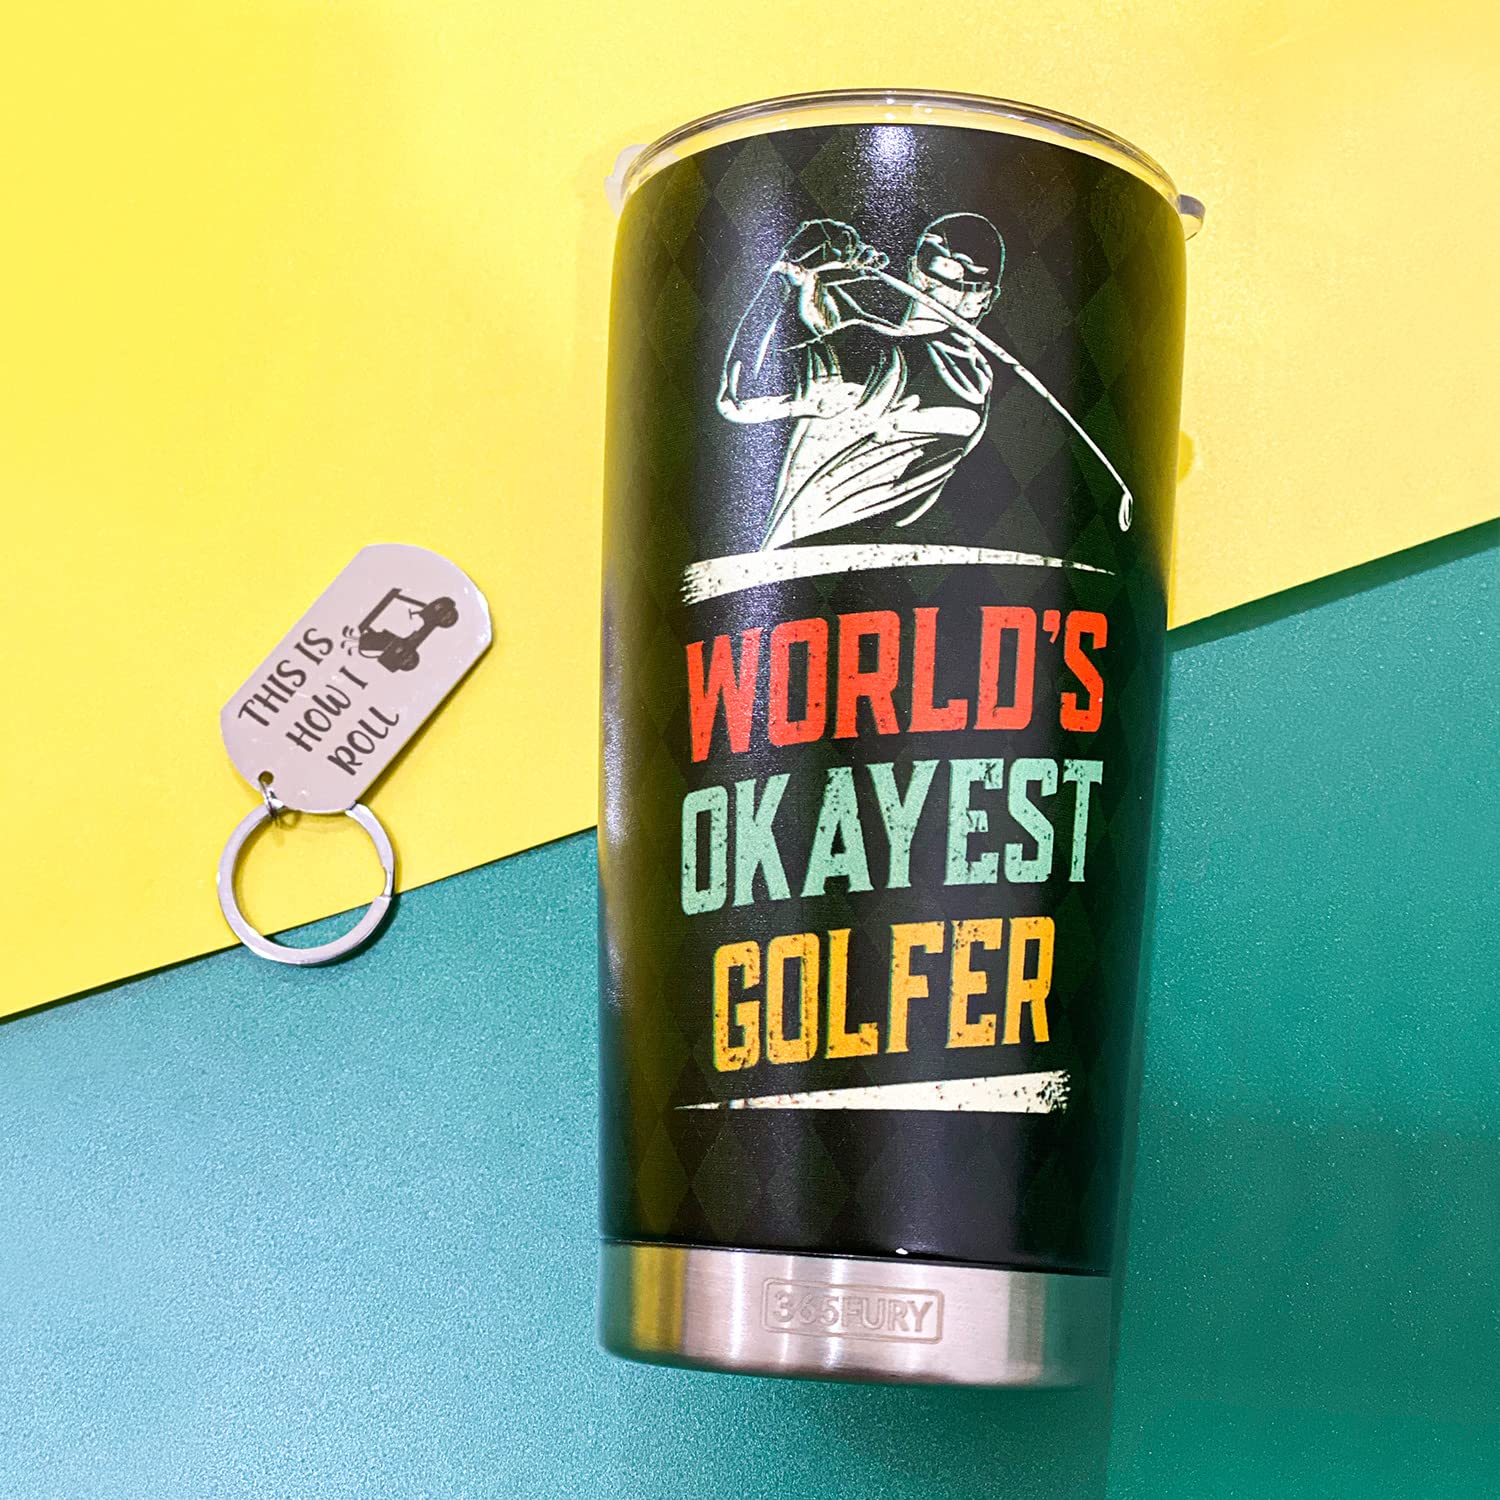 365FURY Golf Gifts For Men, Dad - Christmas, Fathers Day Golf Gifts For Men, Dad - Worlds Okayest Golfer 20oz Tumbler & Keychain - Golf Gag Gifts Accessories For Men Golfers, Funny Birthday Golf Gifts